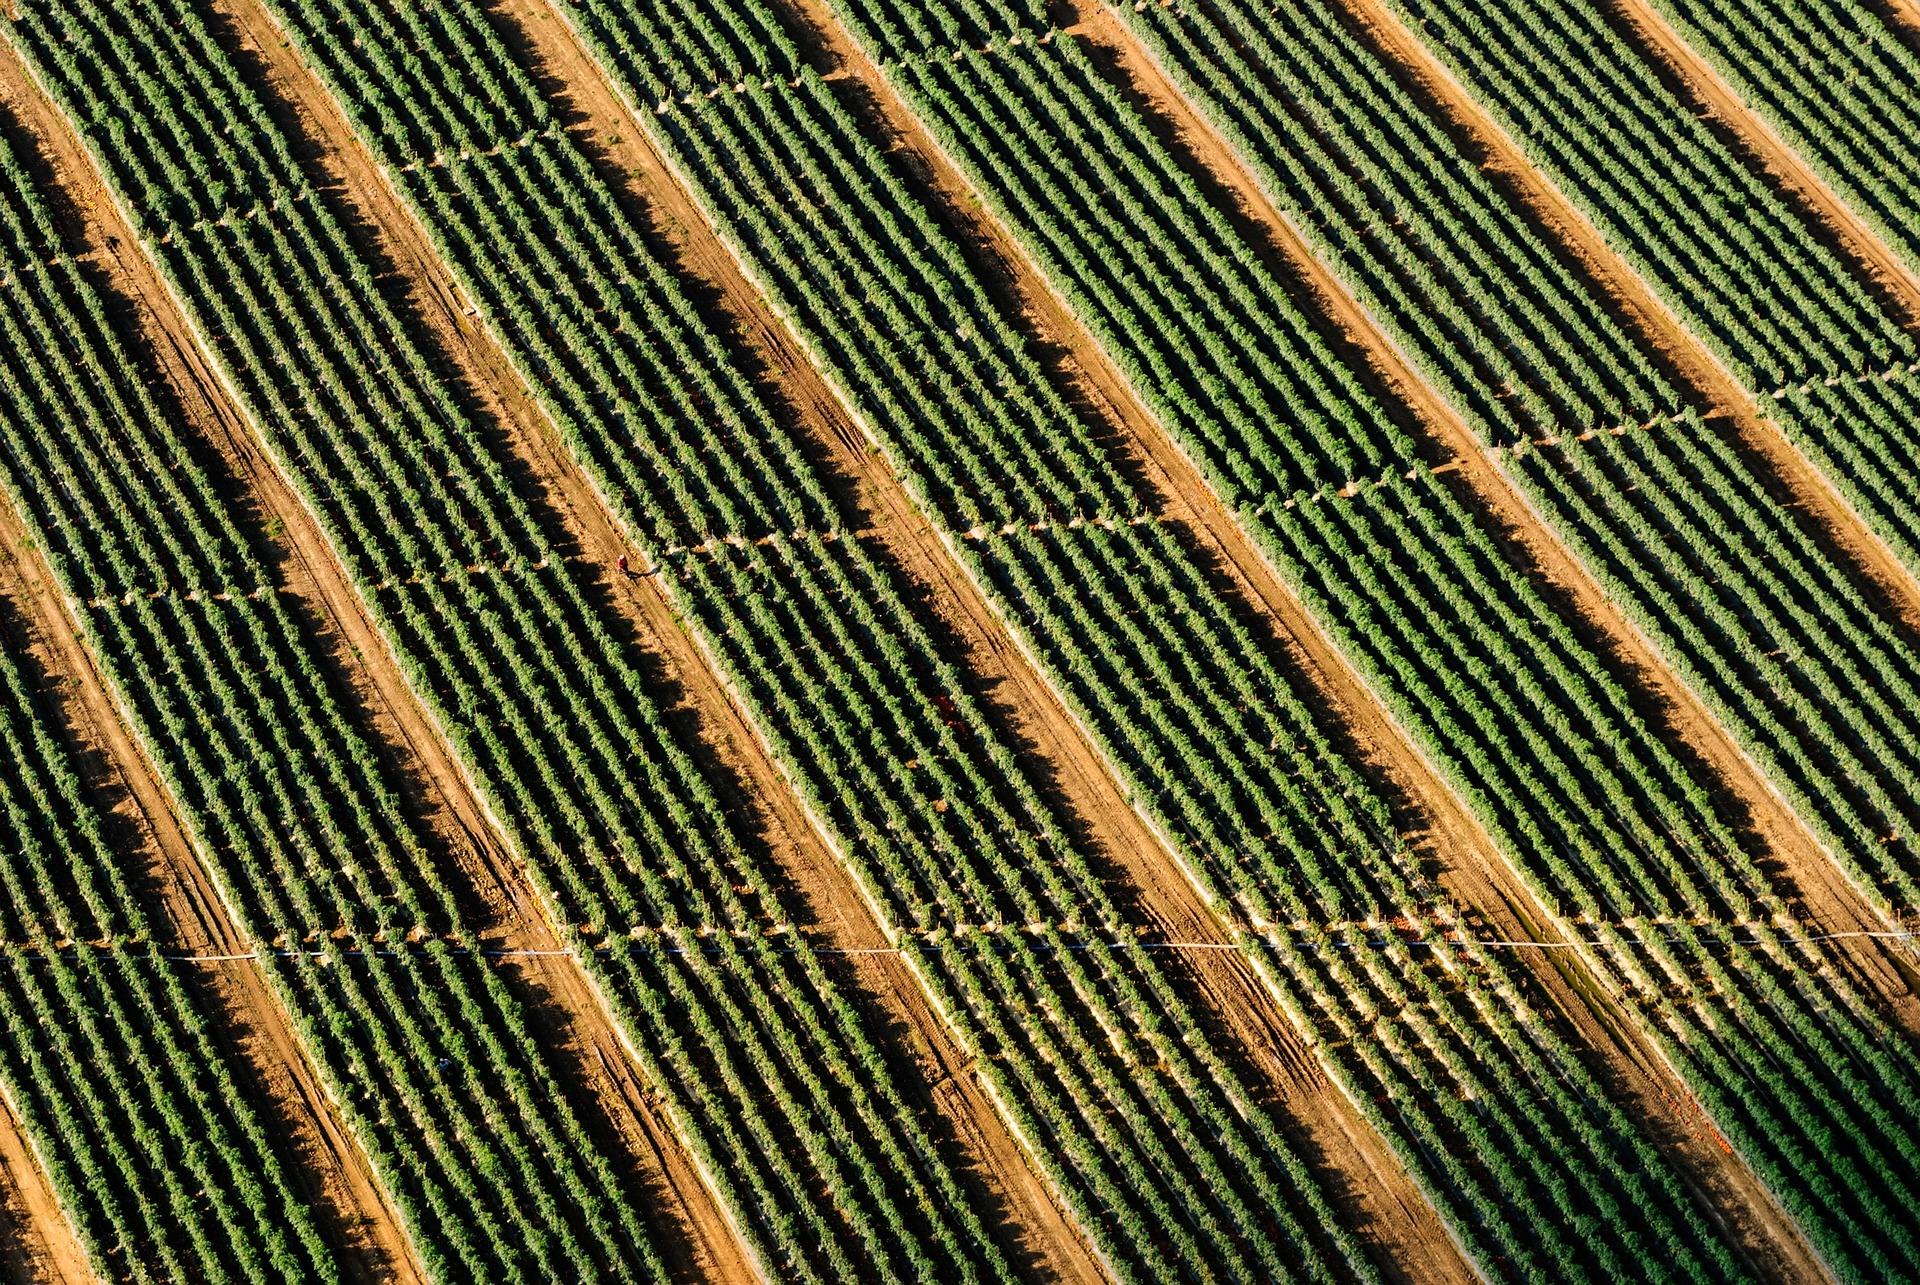 Image of identical farm rows in a field